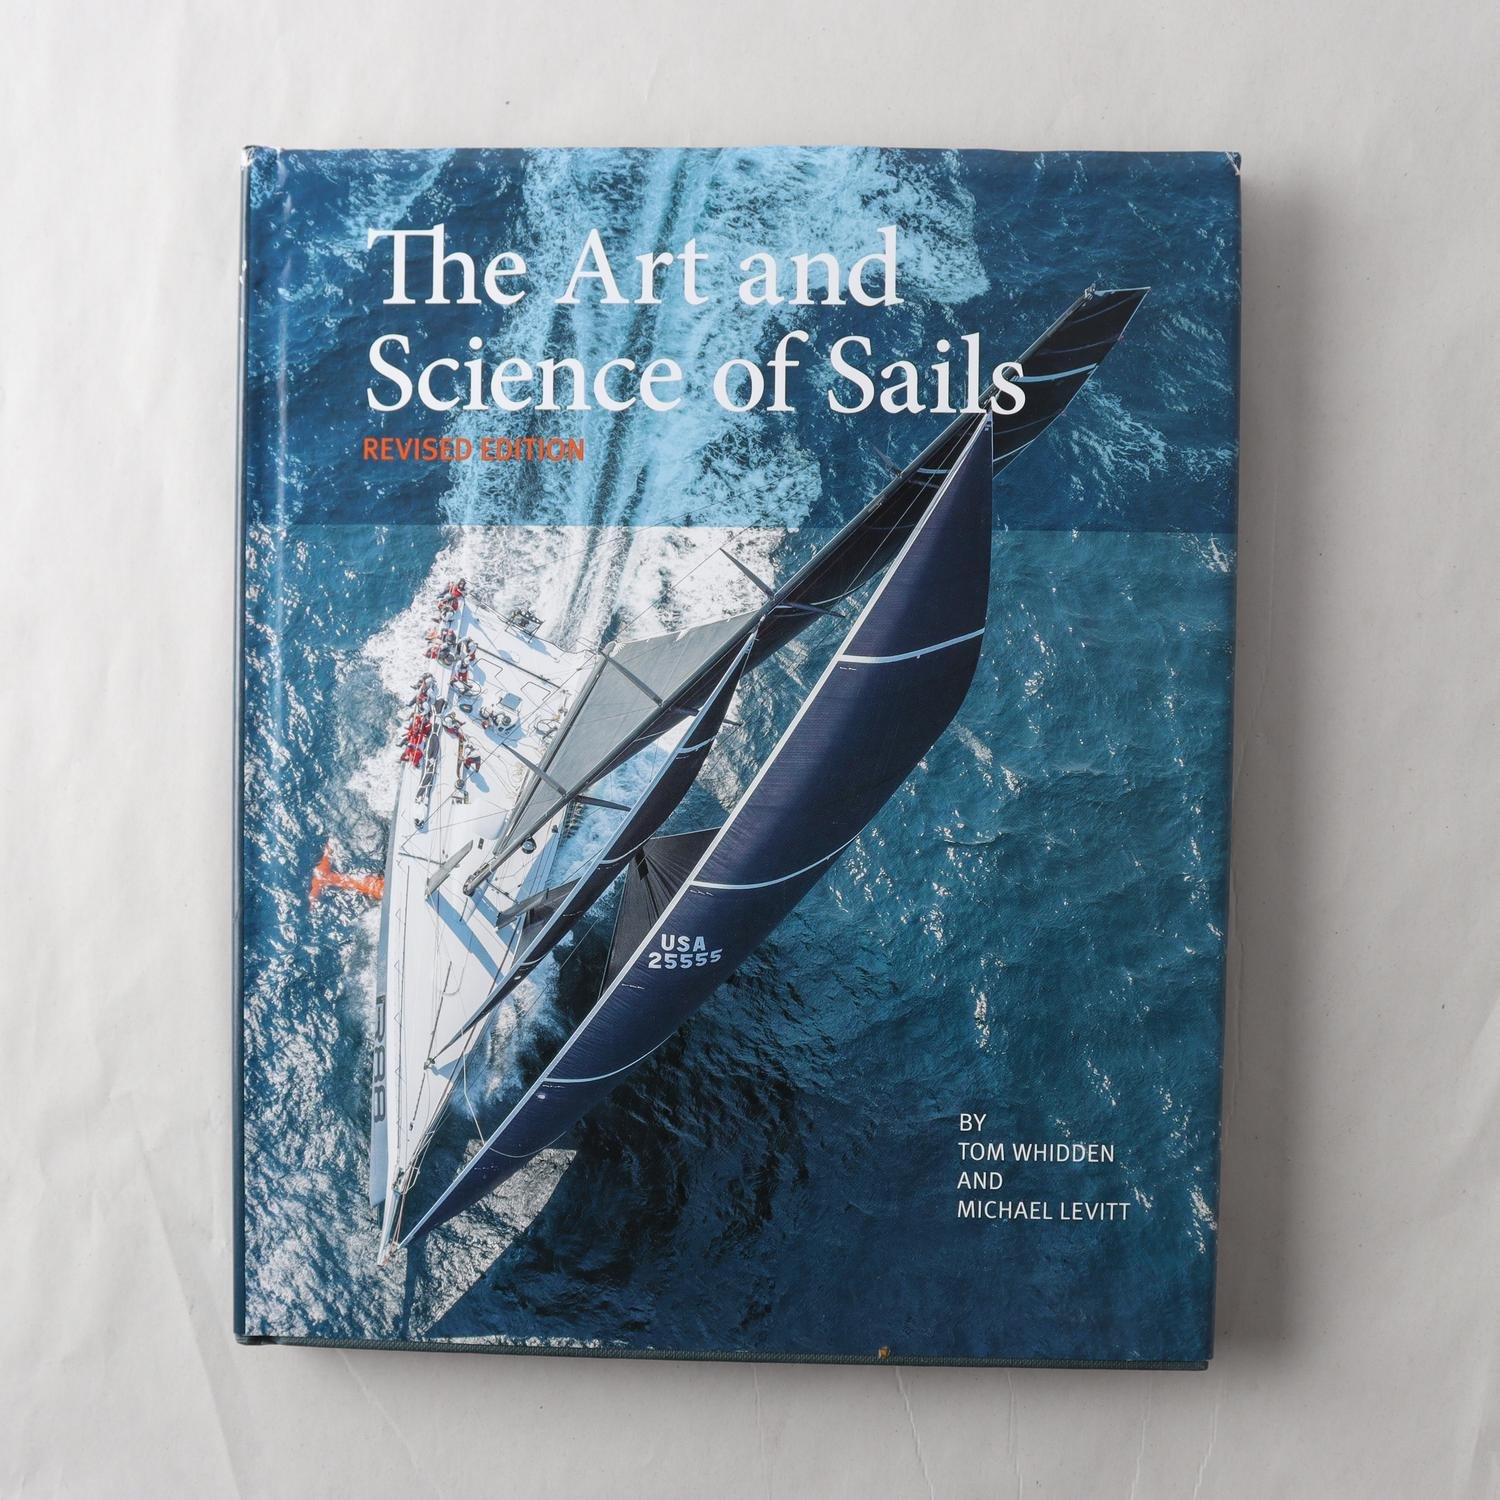 The Art and Science of Sails, Tom Whidden & Michael Levitt